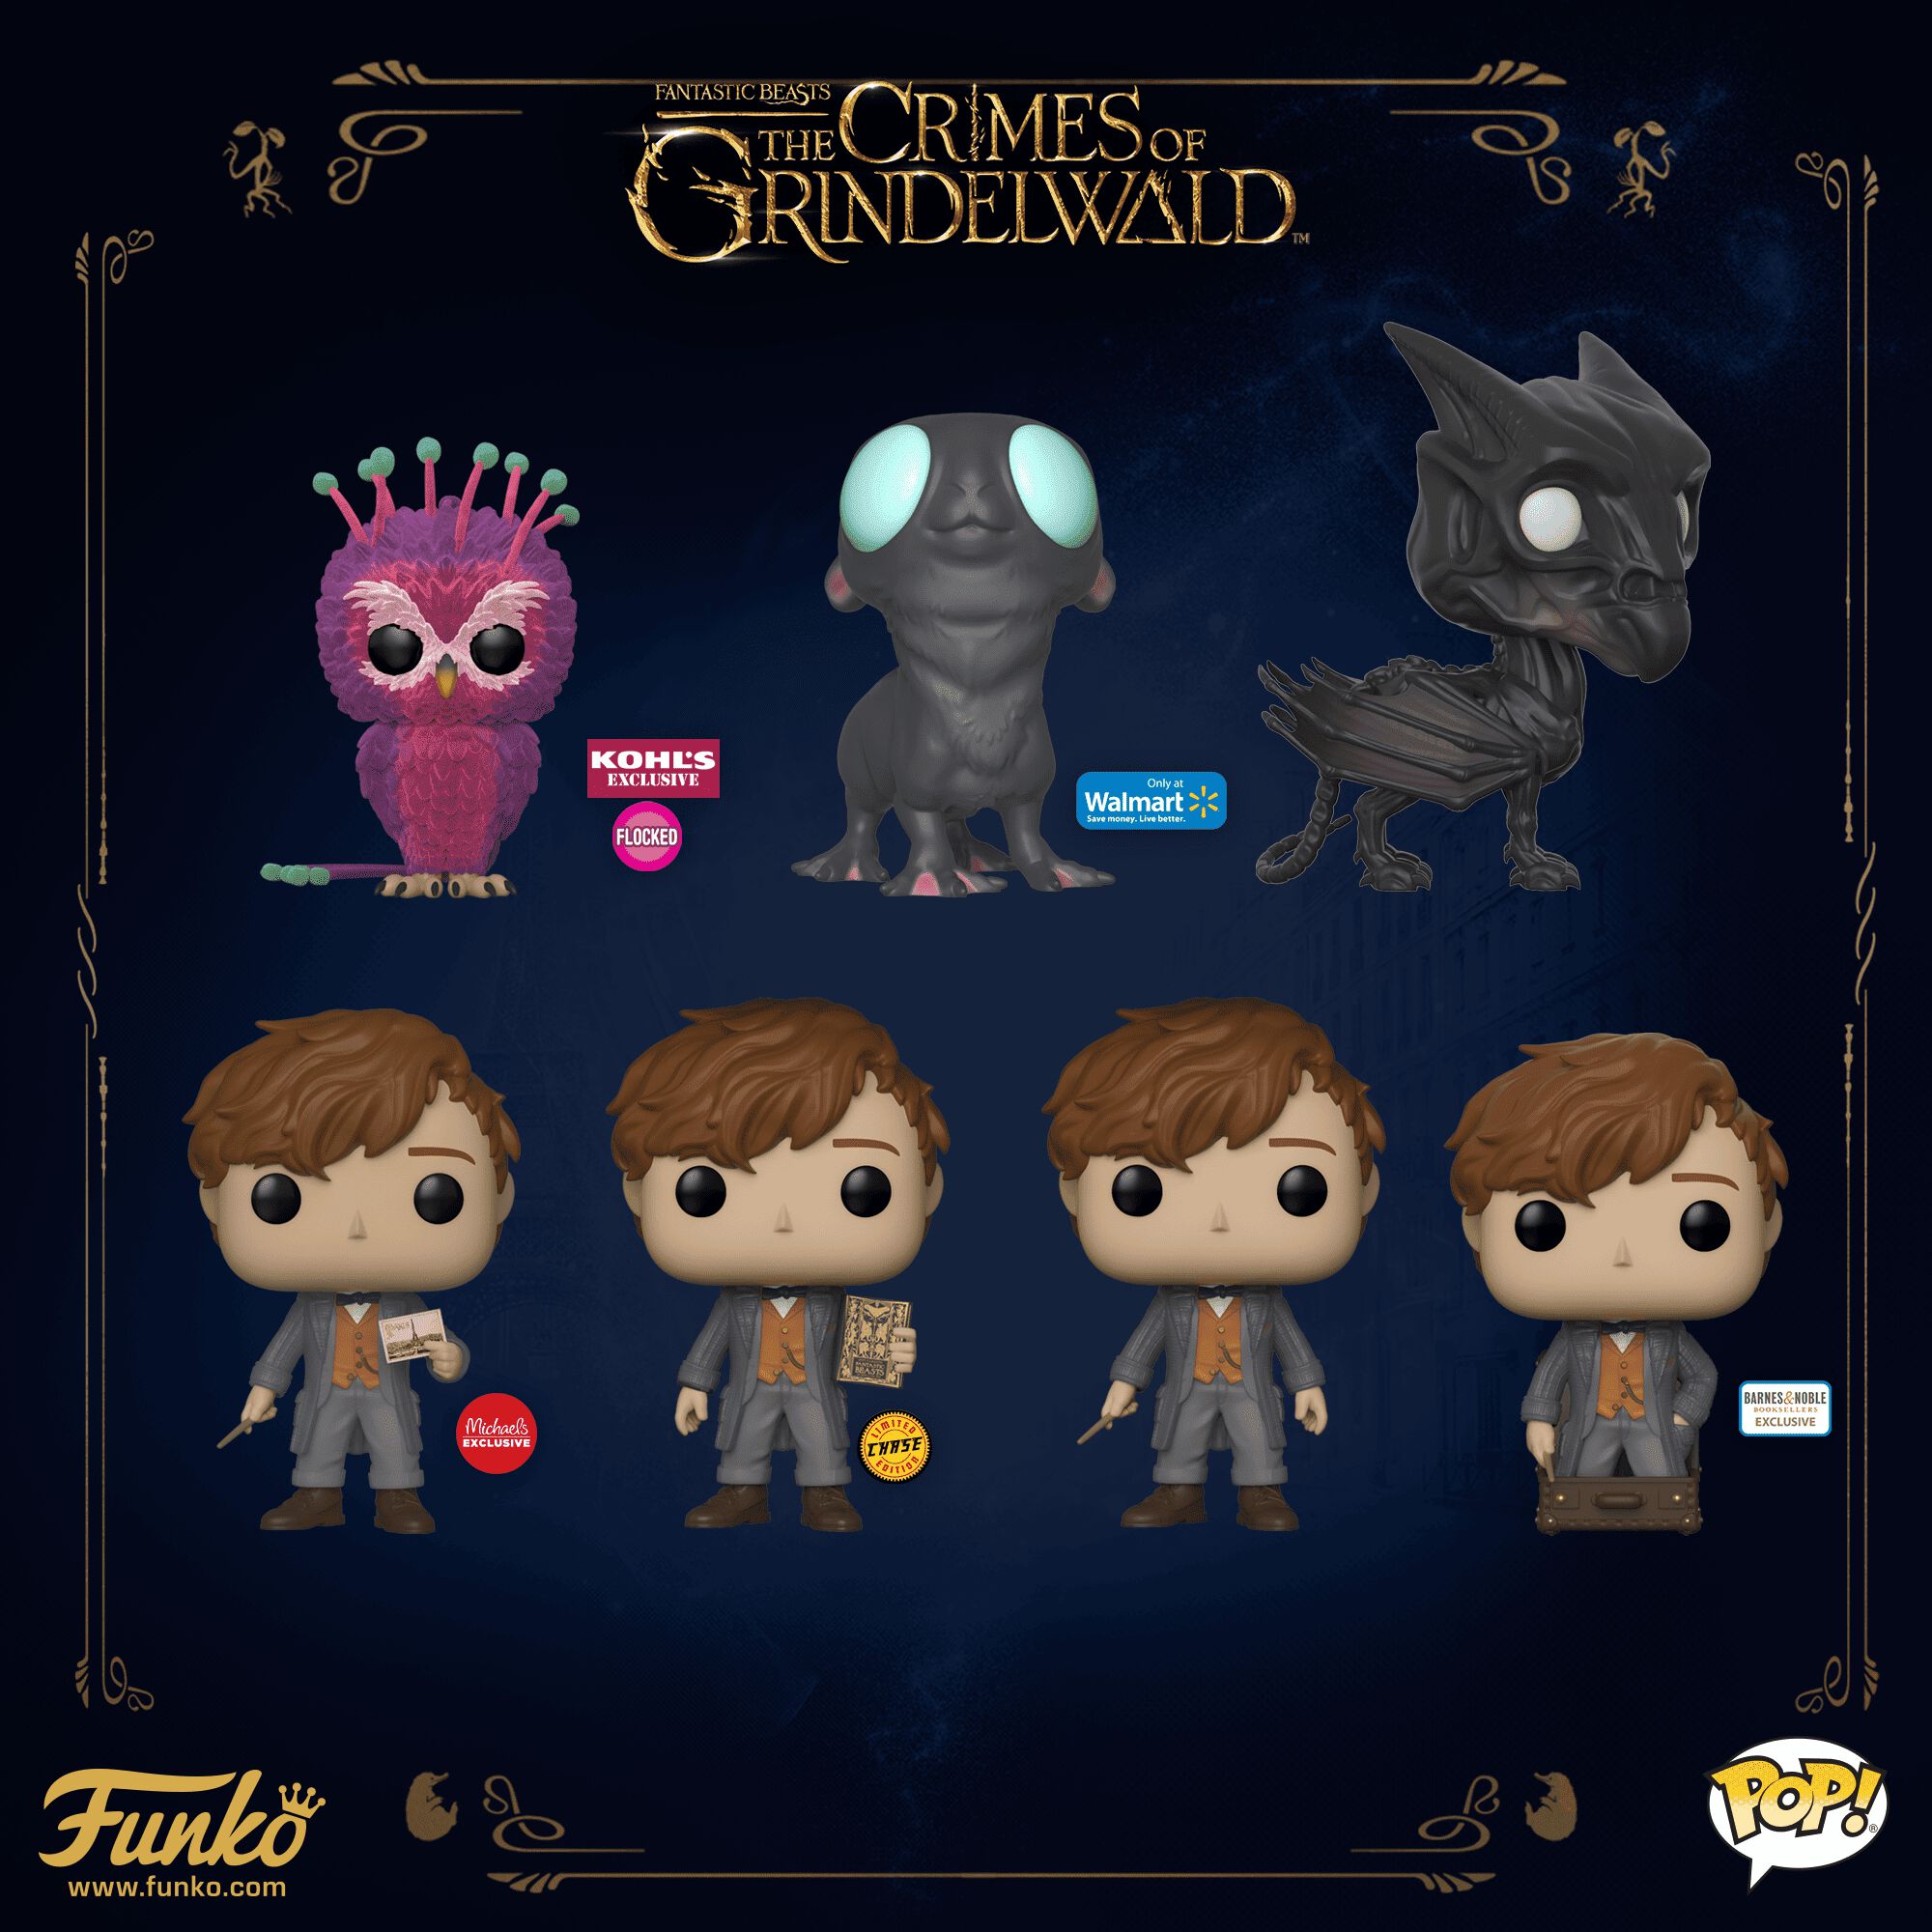 Coming Soon: Fantastic Beasts: The Crimes of Grindelwald!